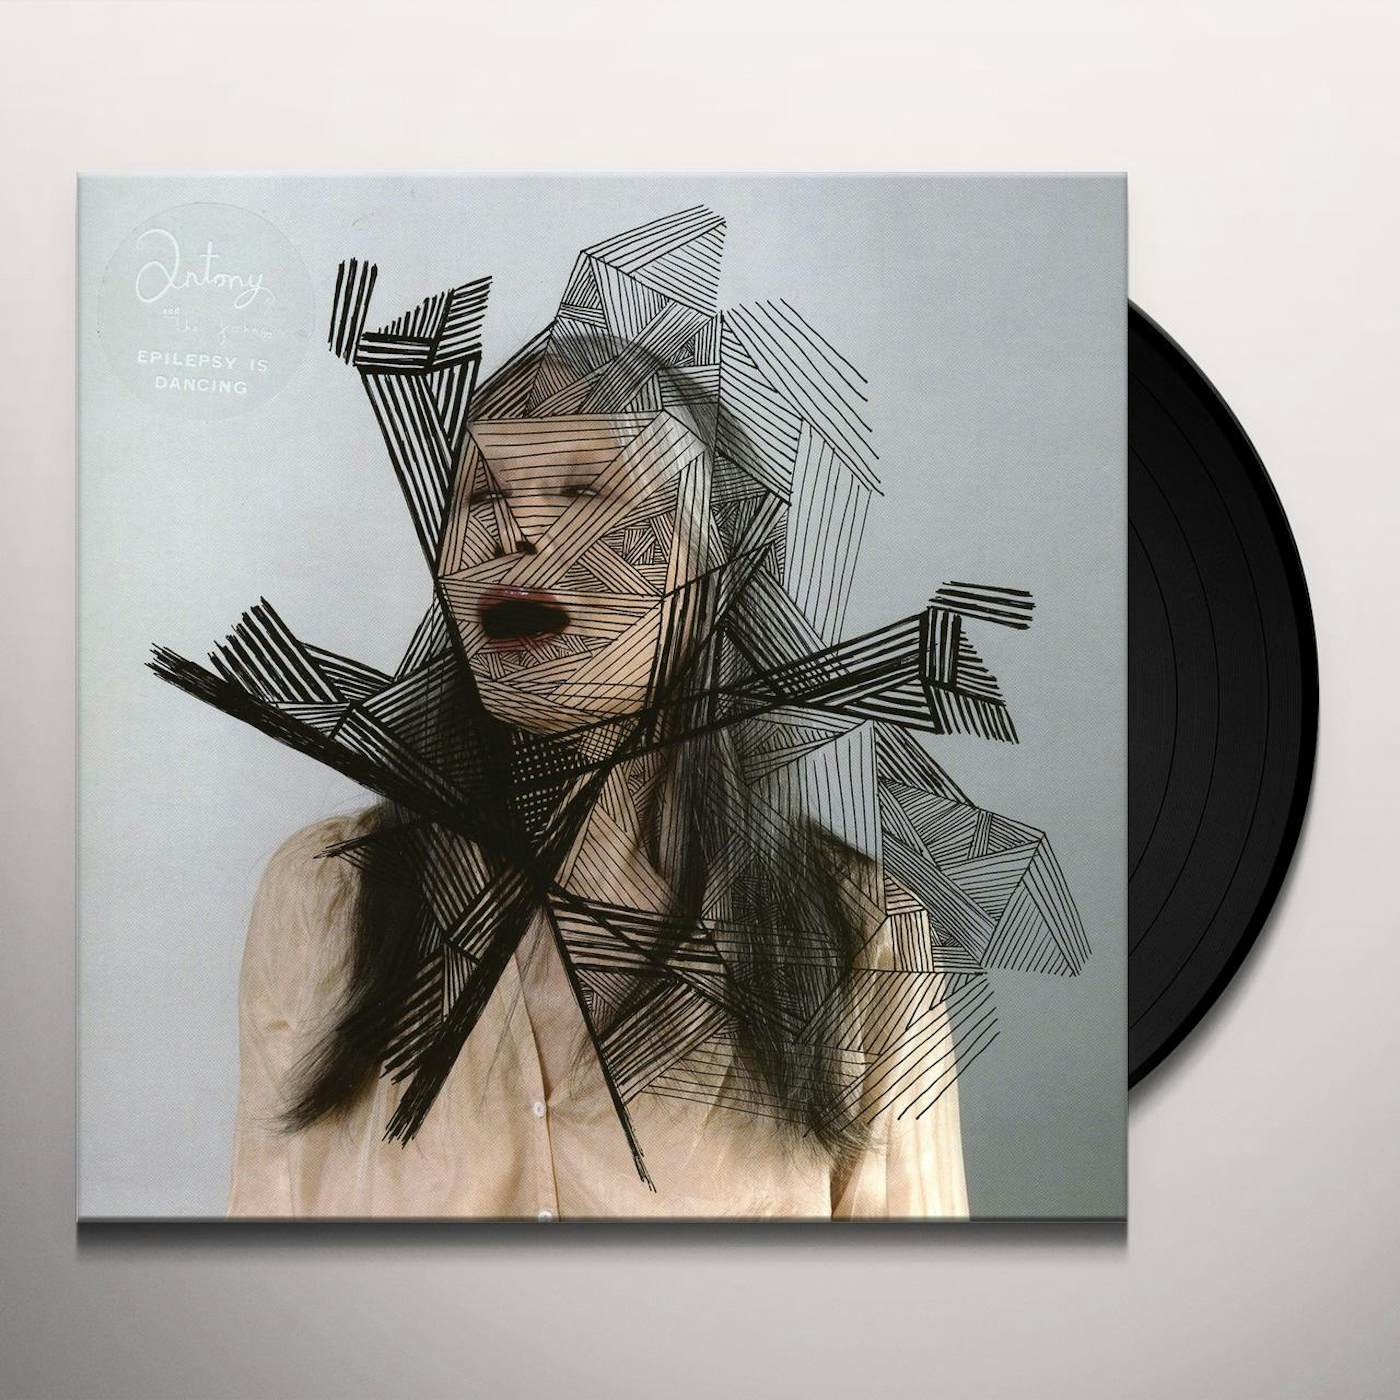 Antony and the Johnsons Epilepsy Is Dancing Vinyl Record